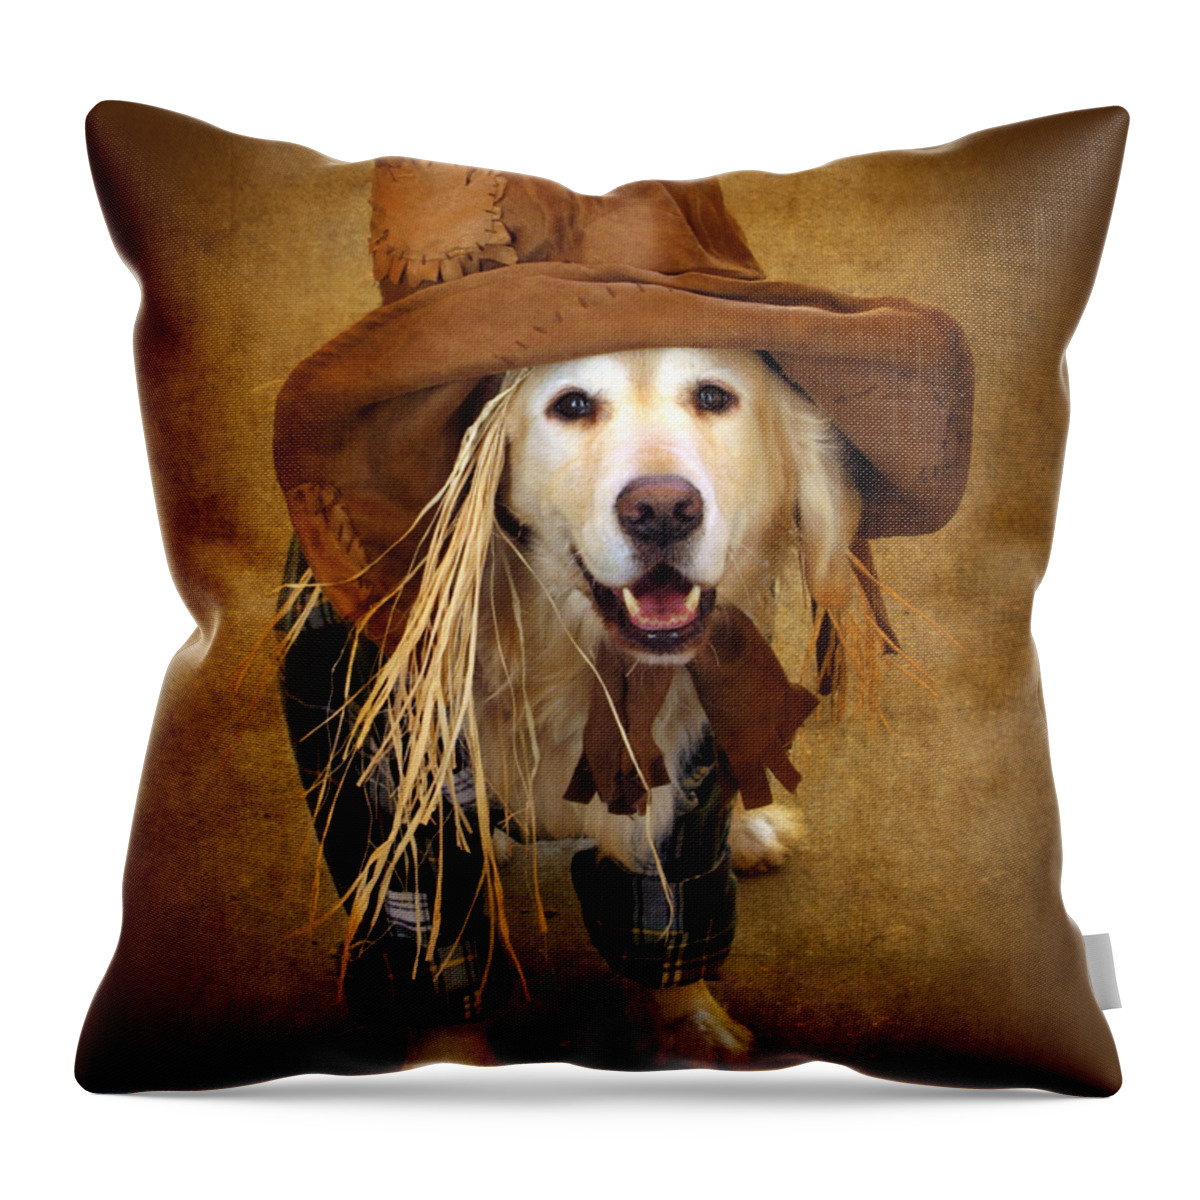 Animal Throw Pillow featuring the photograph Trick or Treat by Jessica Jenney